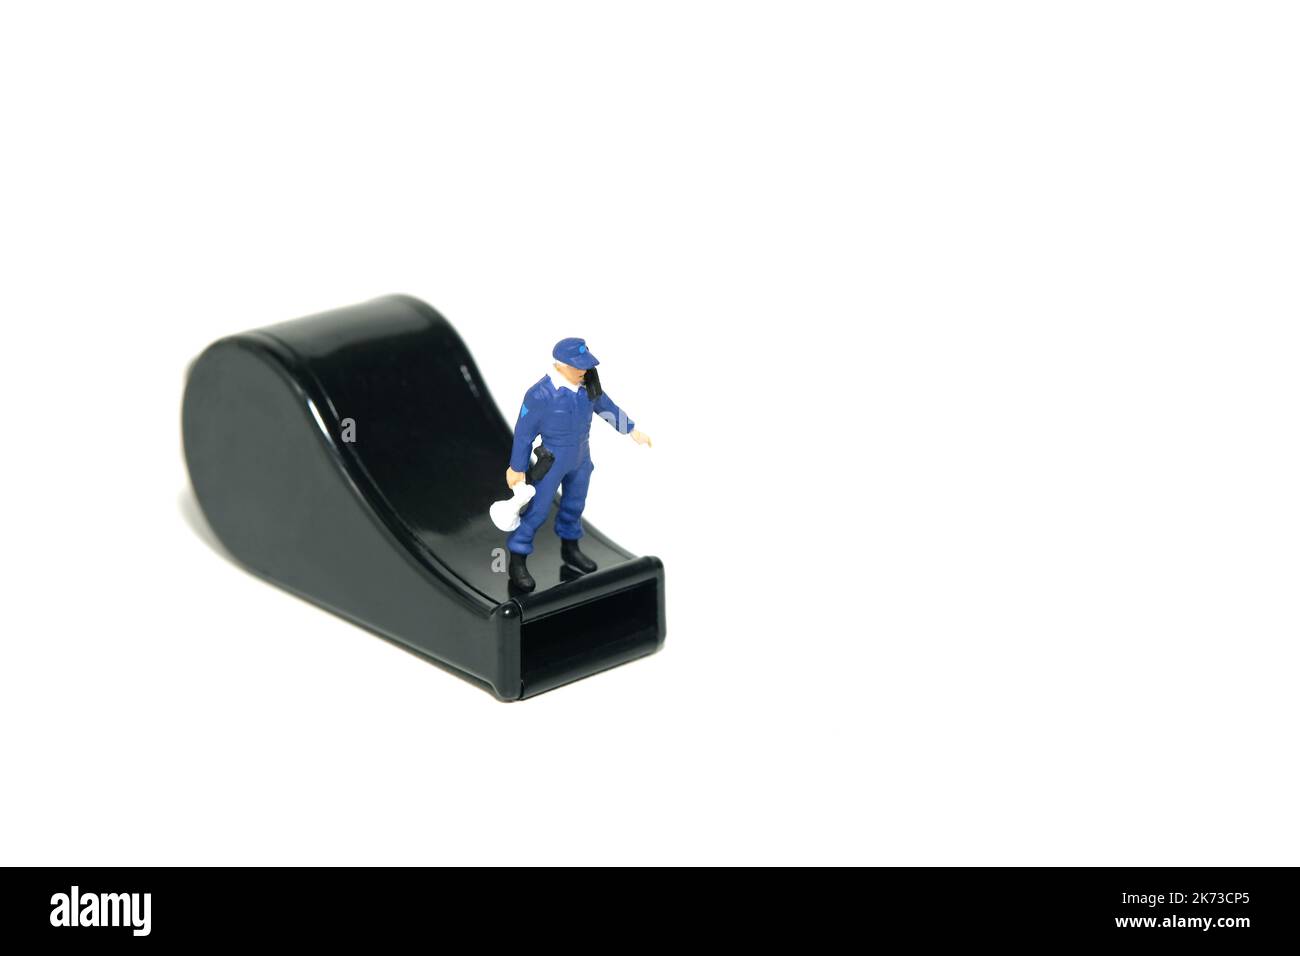 Miniature people toy figure photography. Justice collaborator and whistleblower protection concept. A security officer standing above black whistle. I Stock Photo